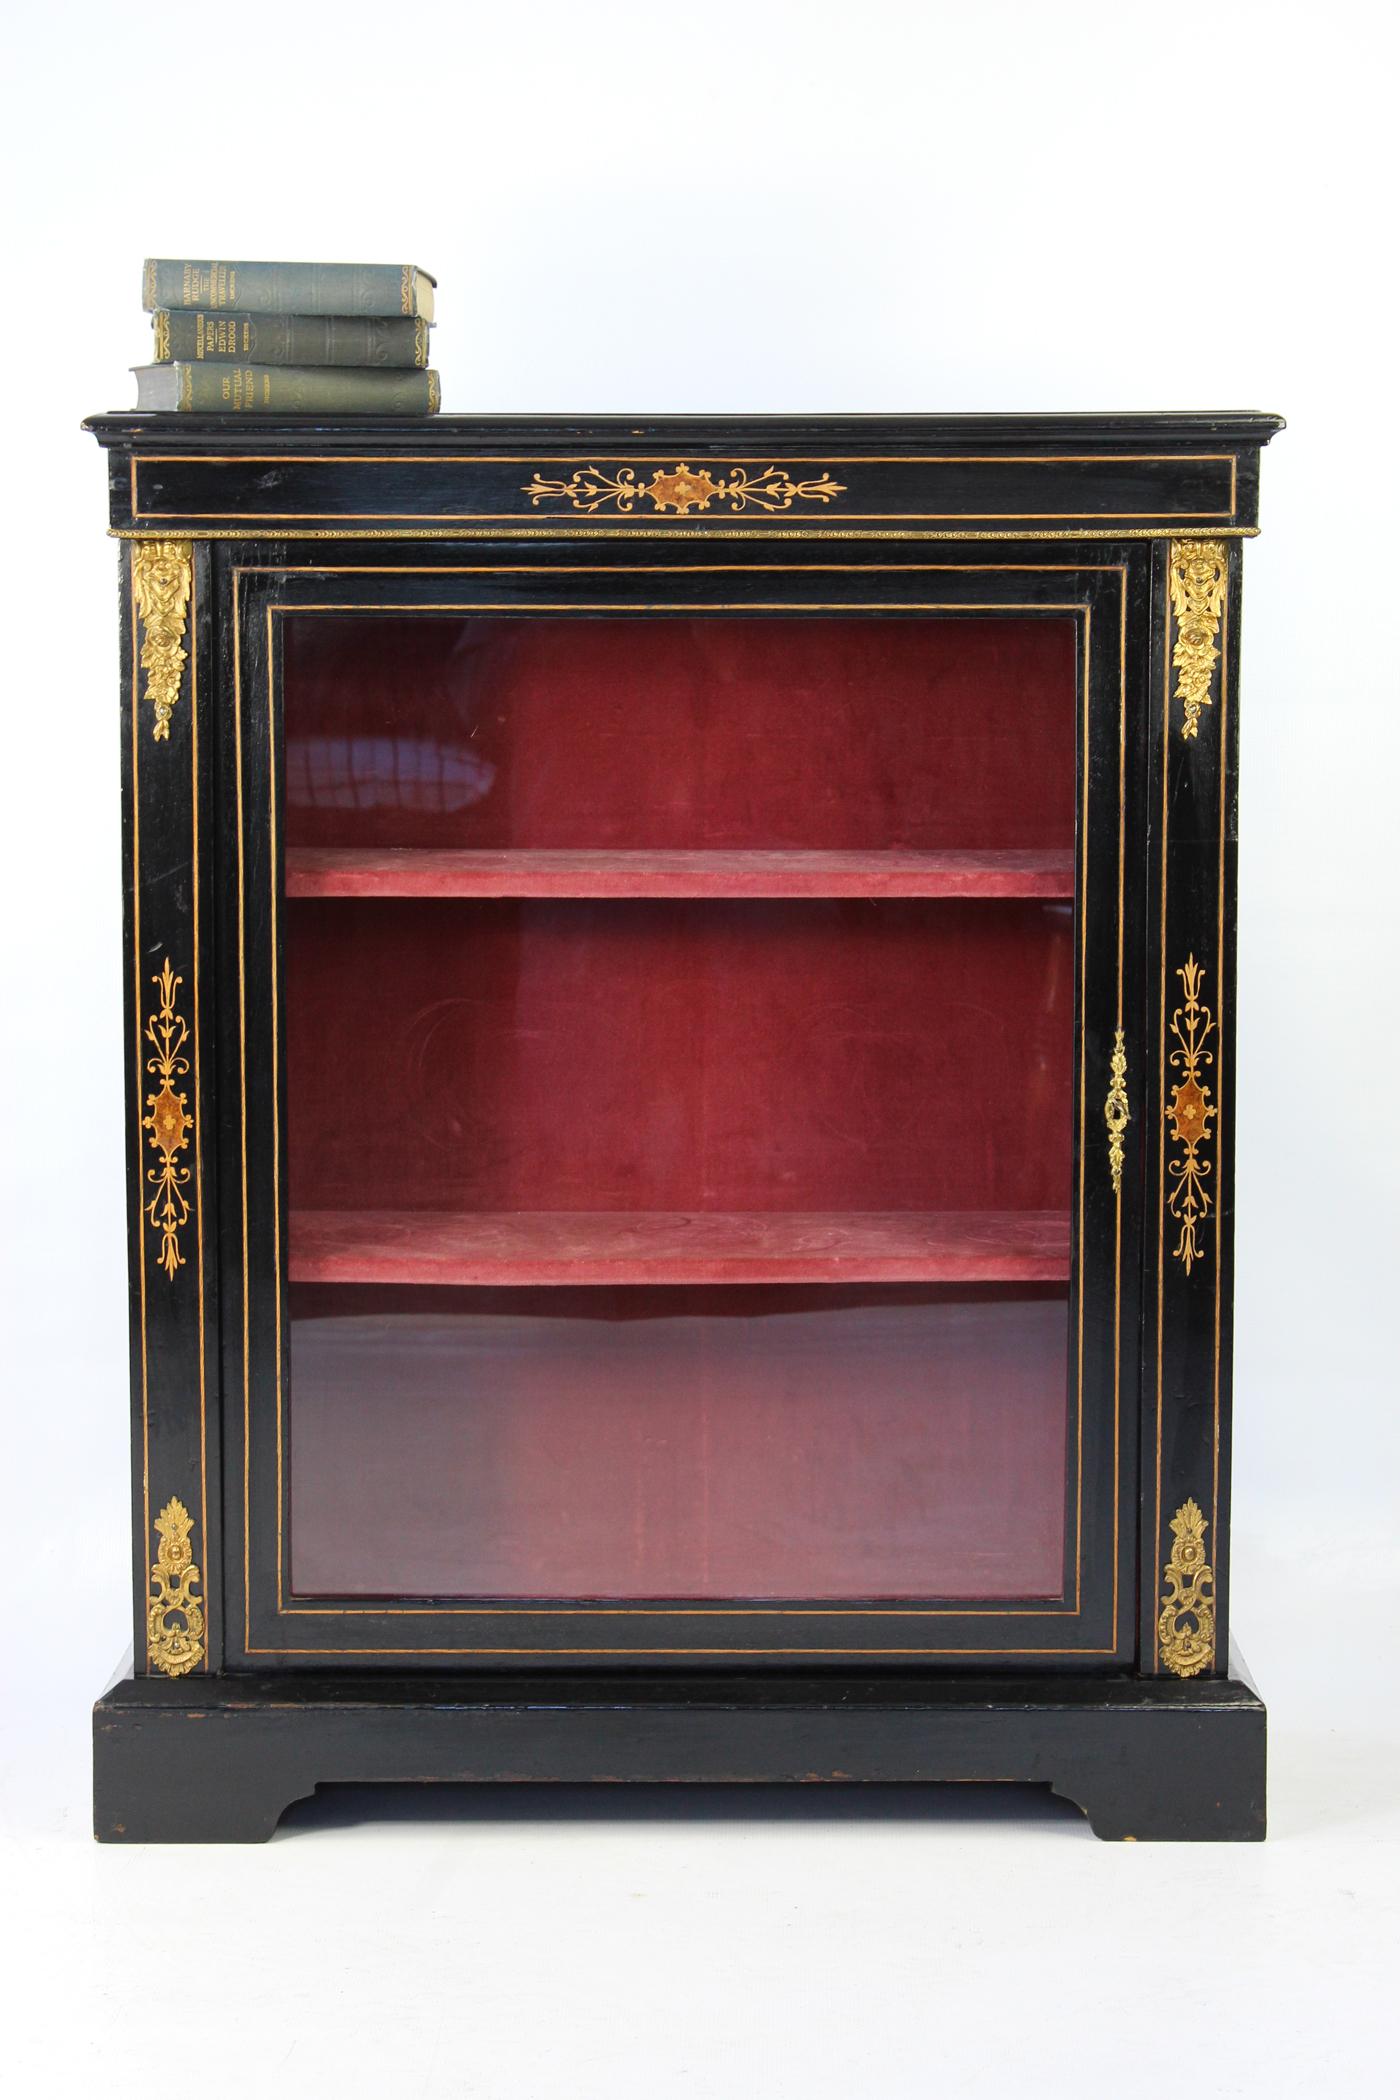 An elegant antique Victorian ebonised and marquetry pier cabinet / bookcase with lockable single glazed door. With marquetry inlaid decoration, with gilt ormolu mounts to the top and bottom corners and brass trim around the top. It comes with a